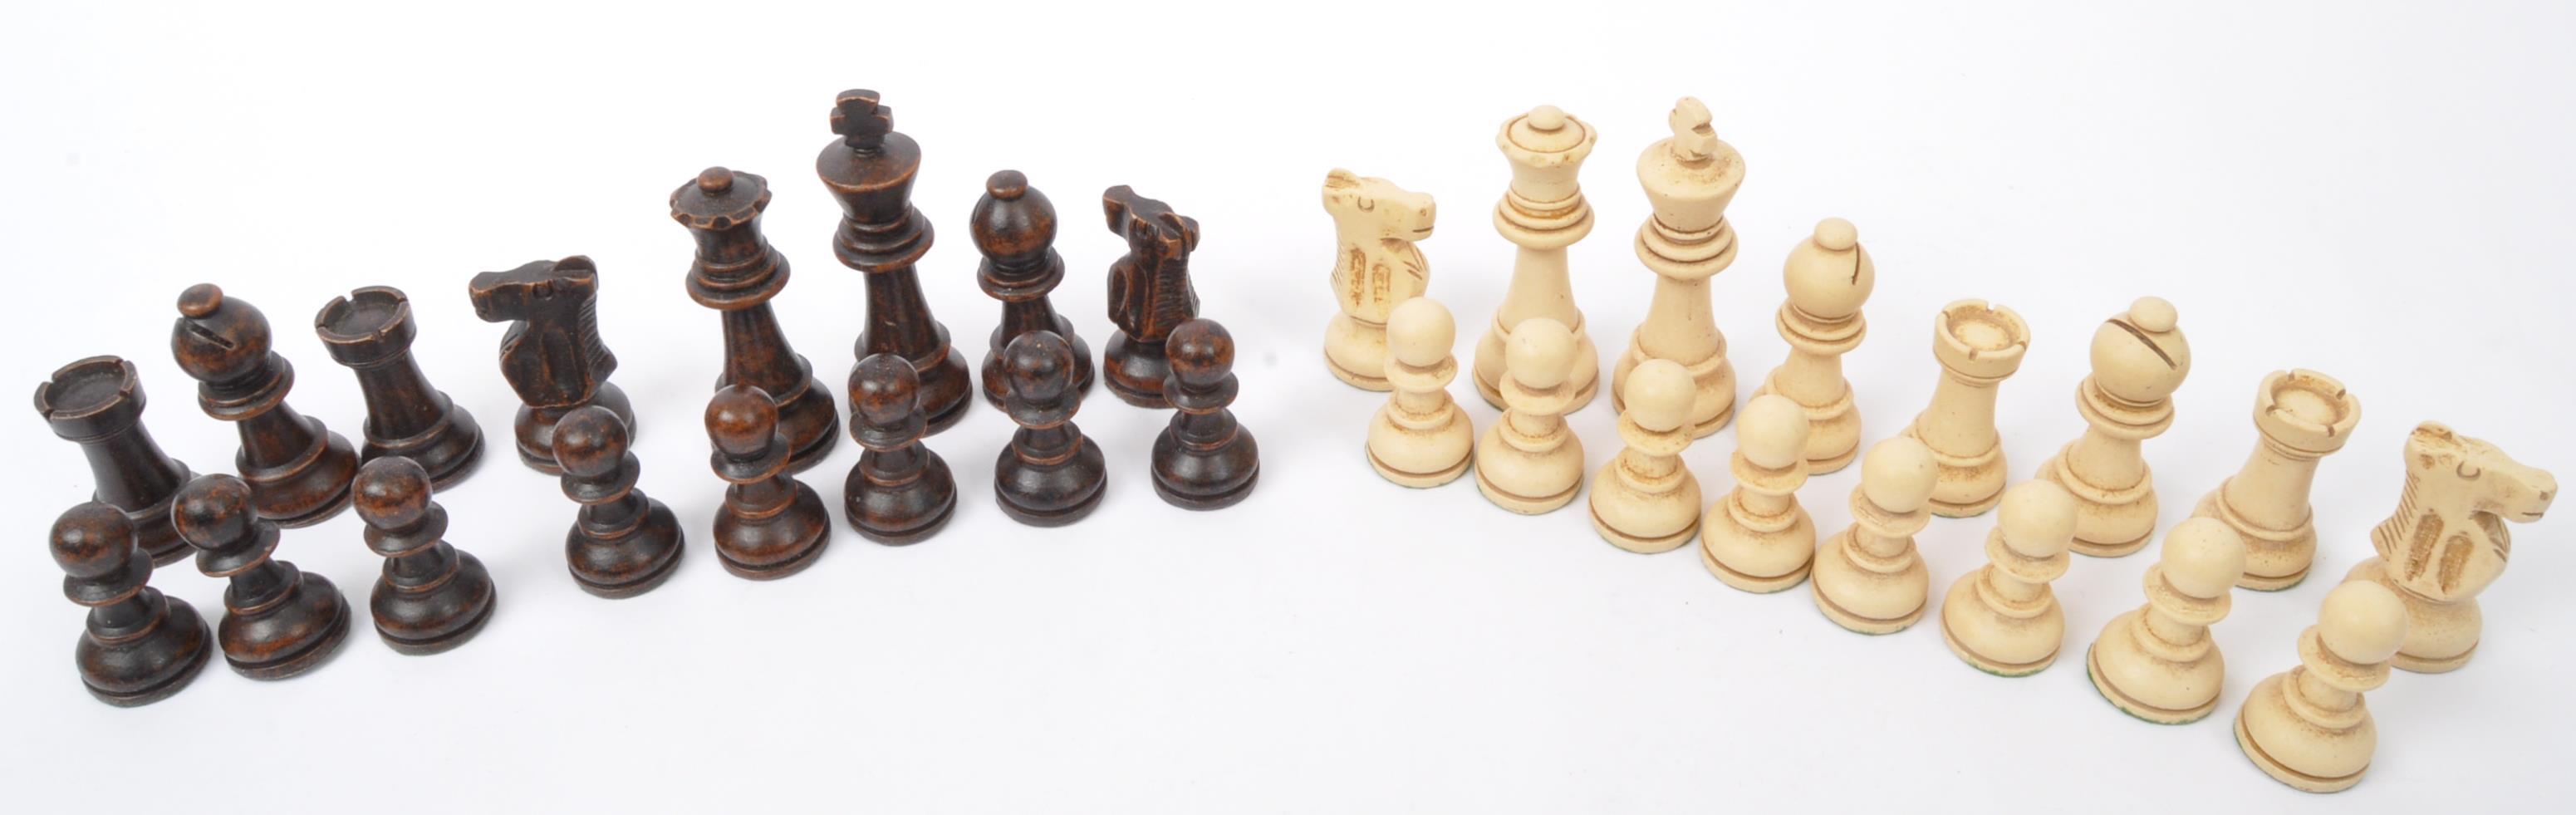 COLLECTION OF VINTAGE TURNED WOOD CHESS PIECES - Image 11 of 19